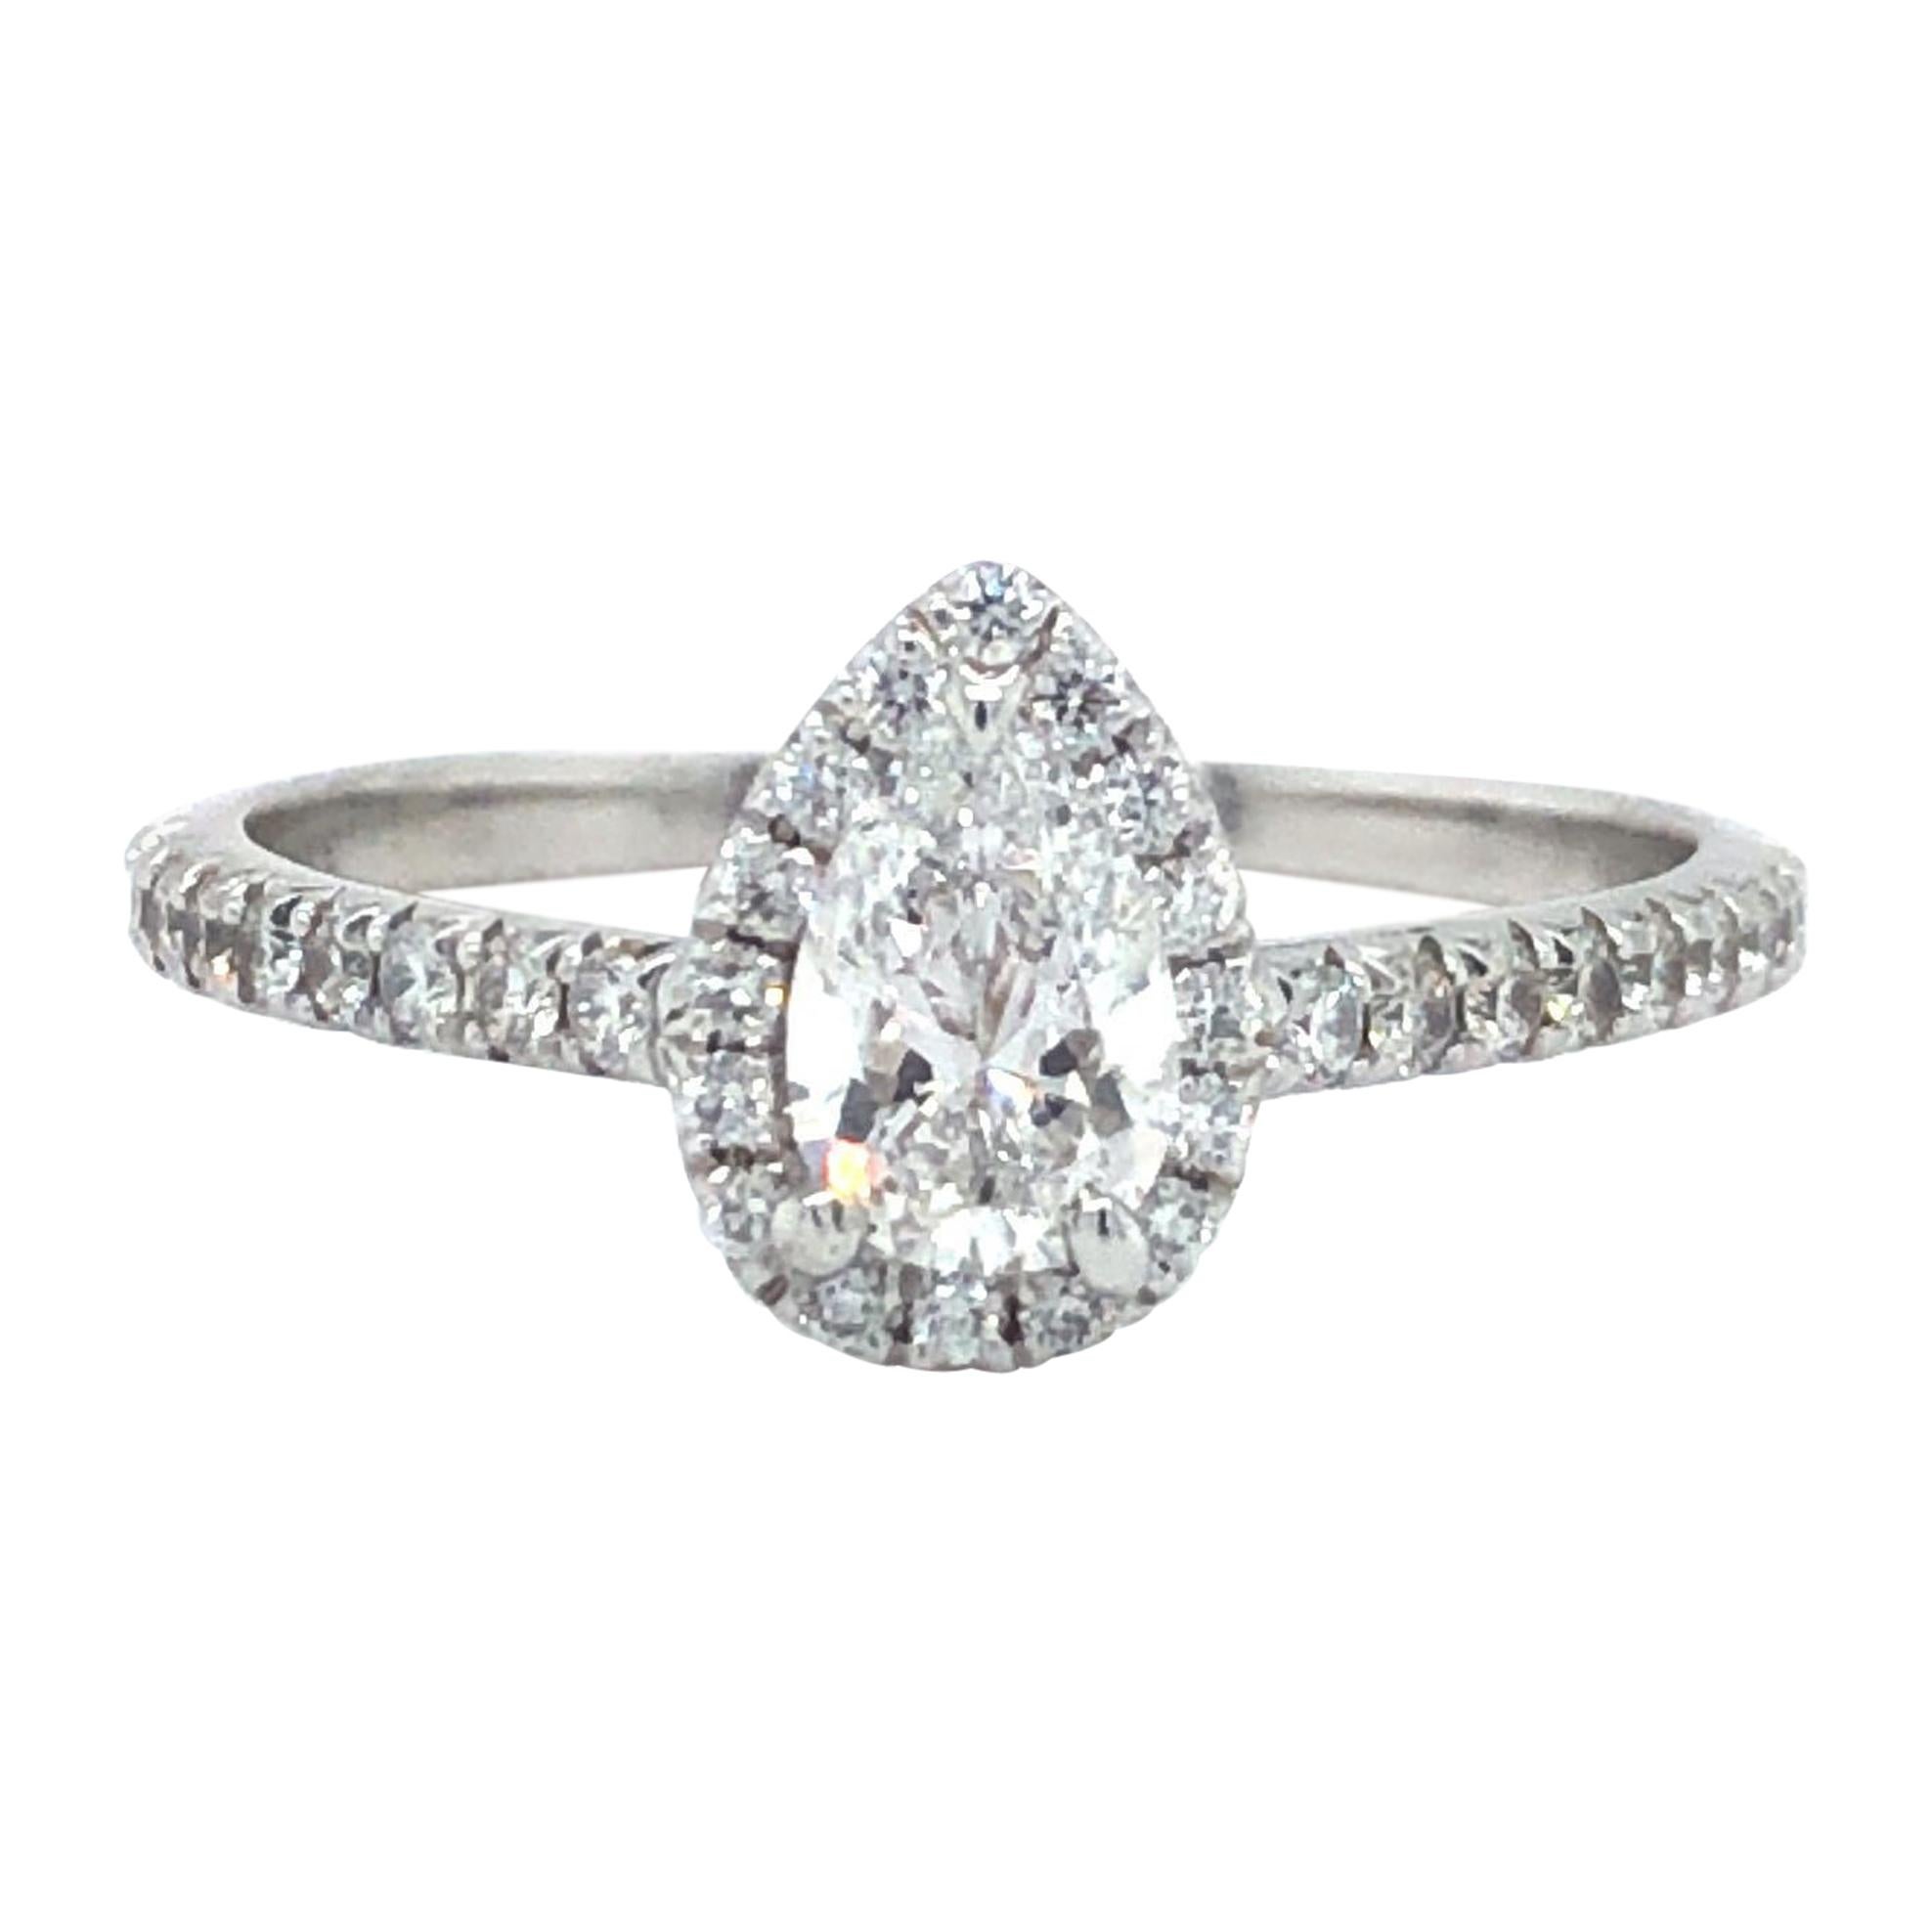 Tiffany & Co. Soleste Pear Diamond Halo Engagement Ring Platinum GIA Certified